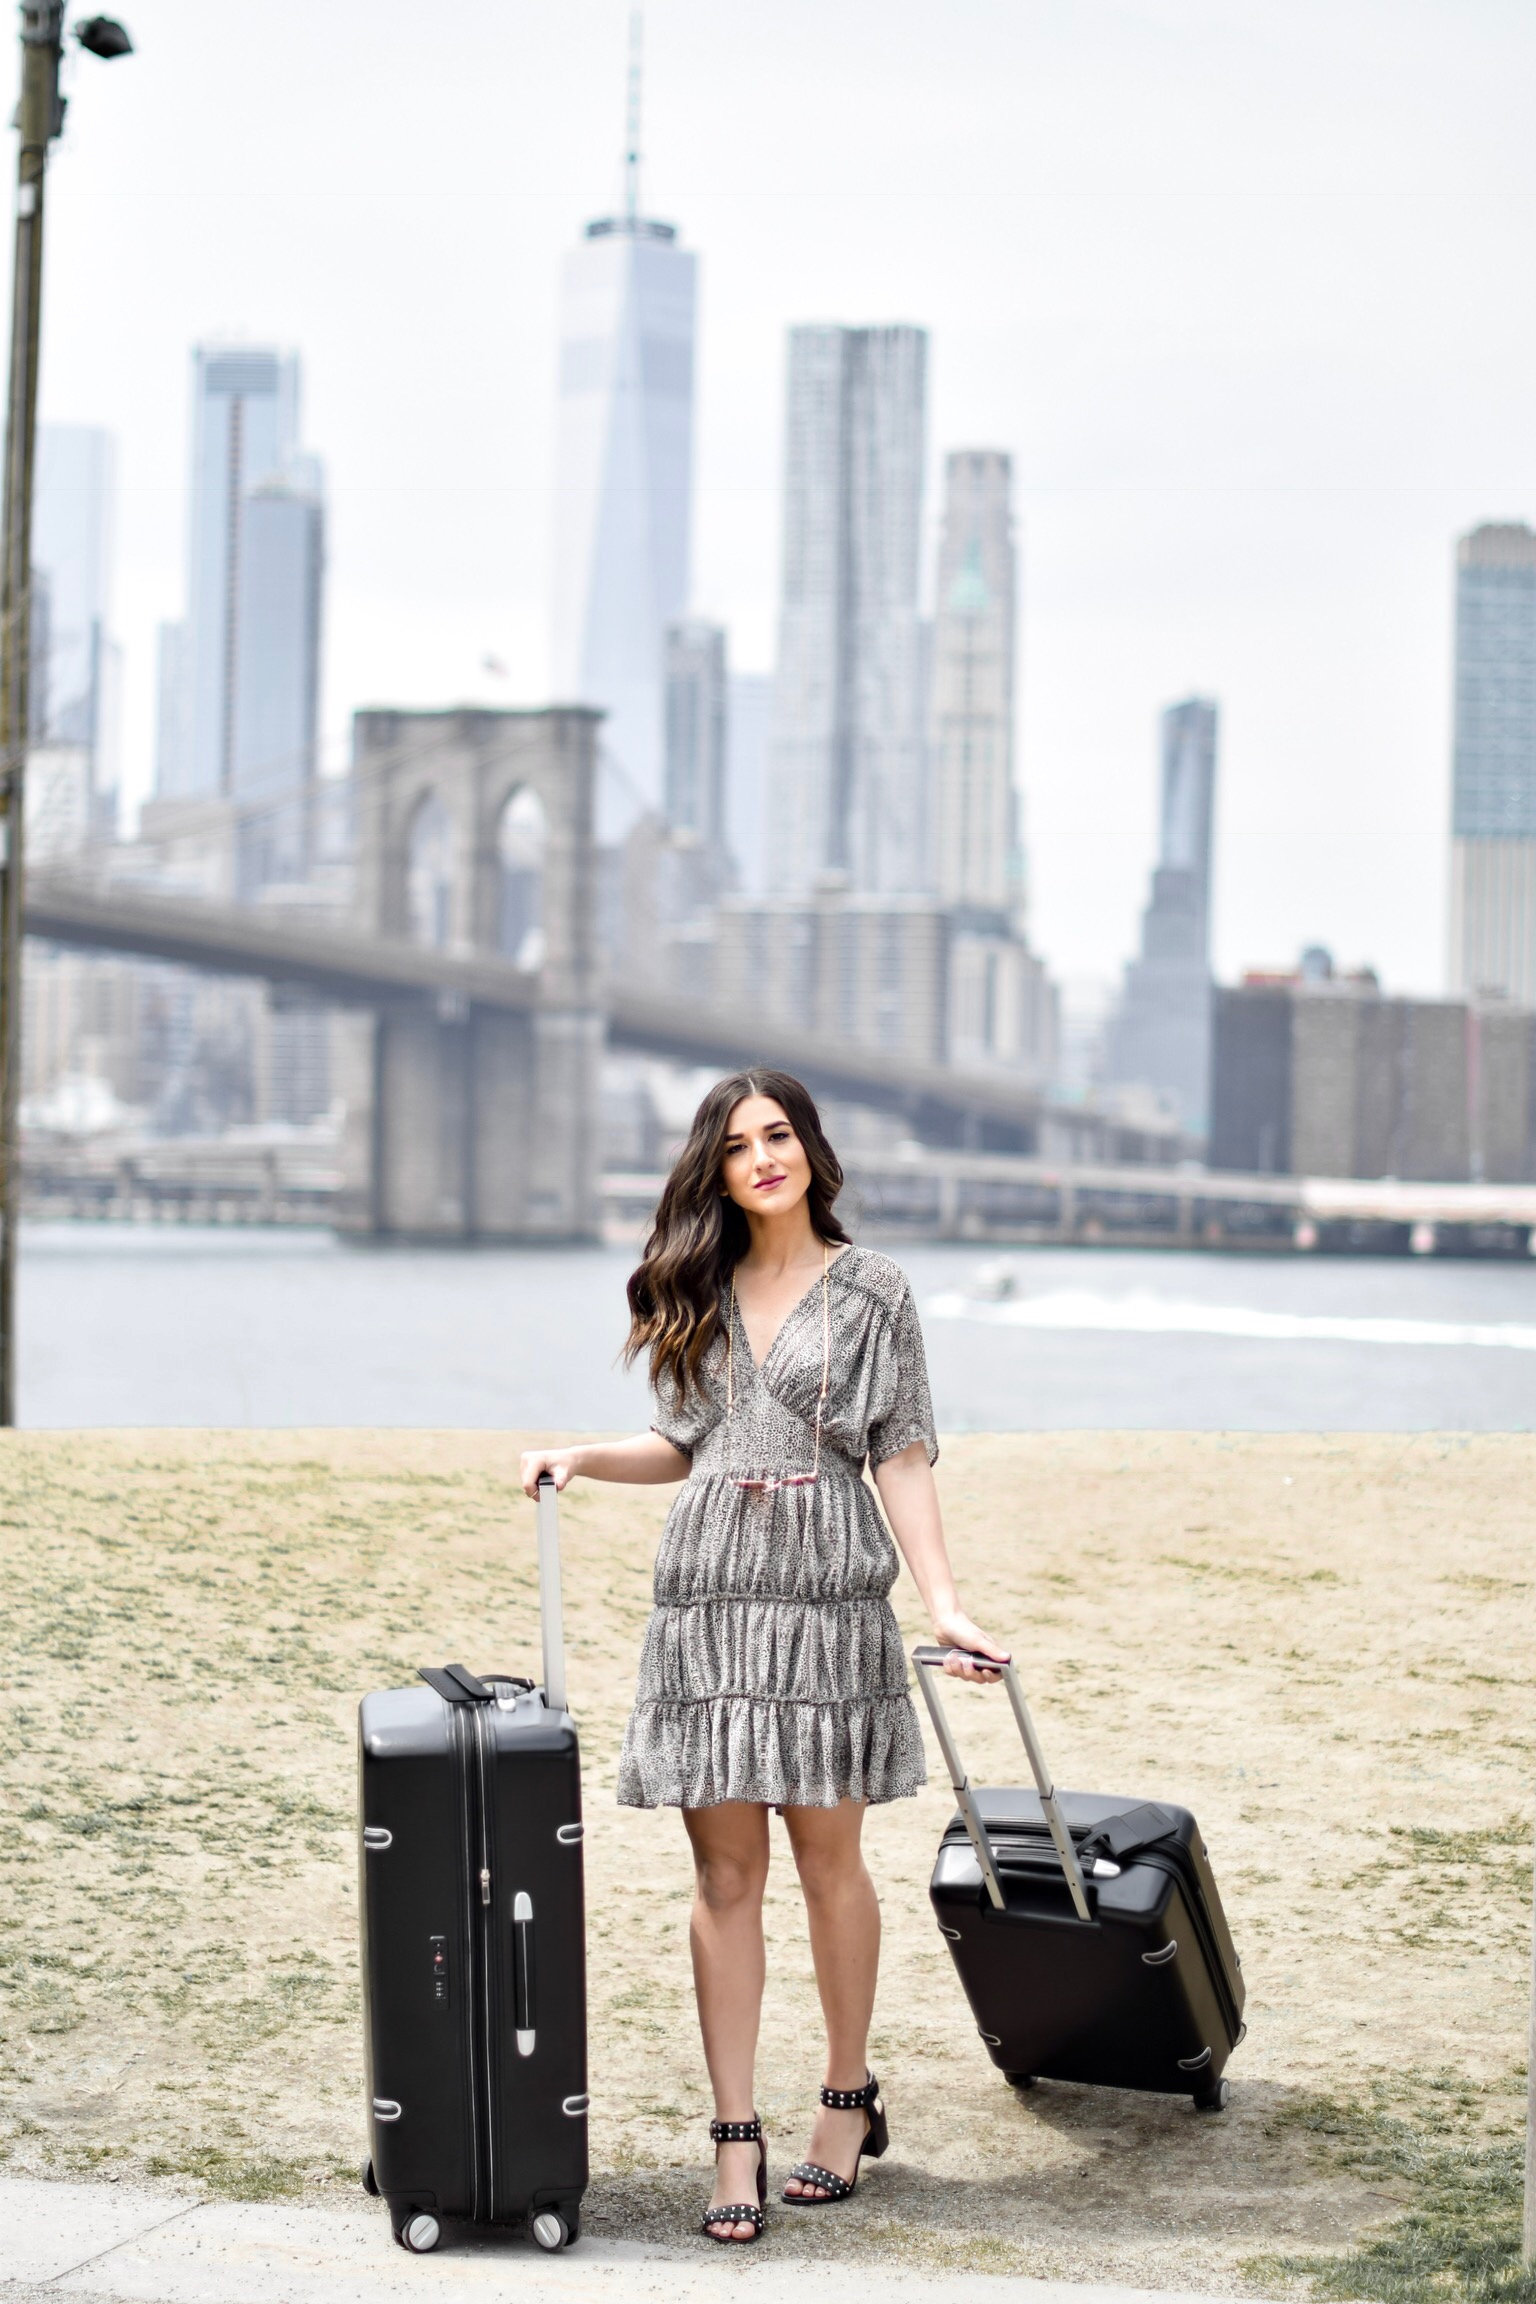 The Perfect Honeymoon Luggage Ricardo Beverly Hills Arris Collection Esther Santer Fashion Blog NYC Street Style Blogger Outfit OOTD Trendy Suitcase Compartment Interior Black Sandals Studs ASOS Convenient Vacation New  York City Skyline Dumbo Europe.jpg